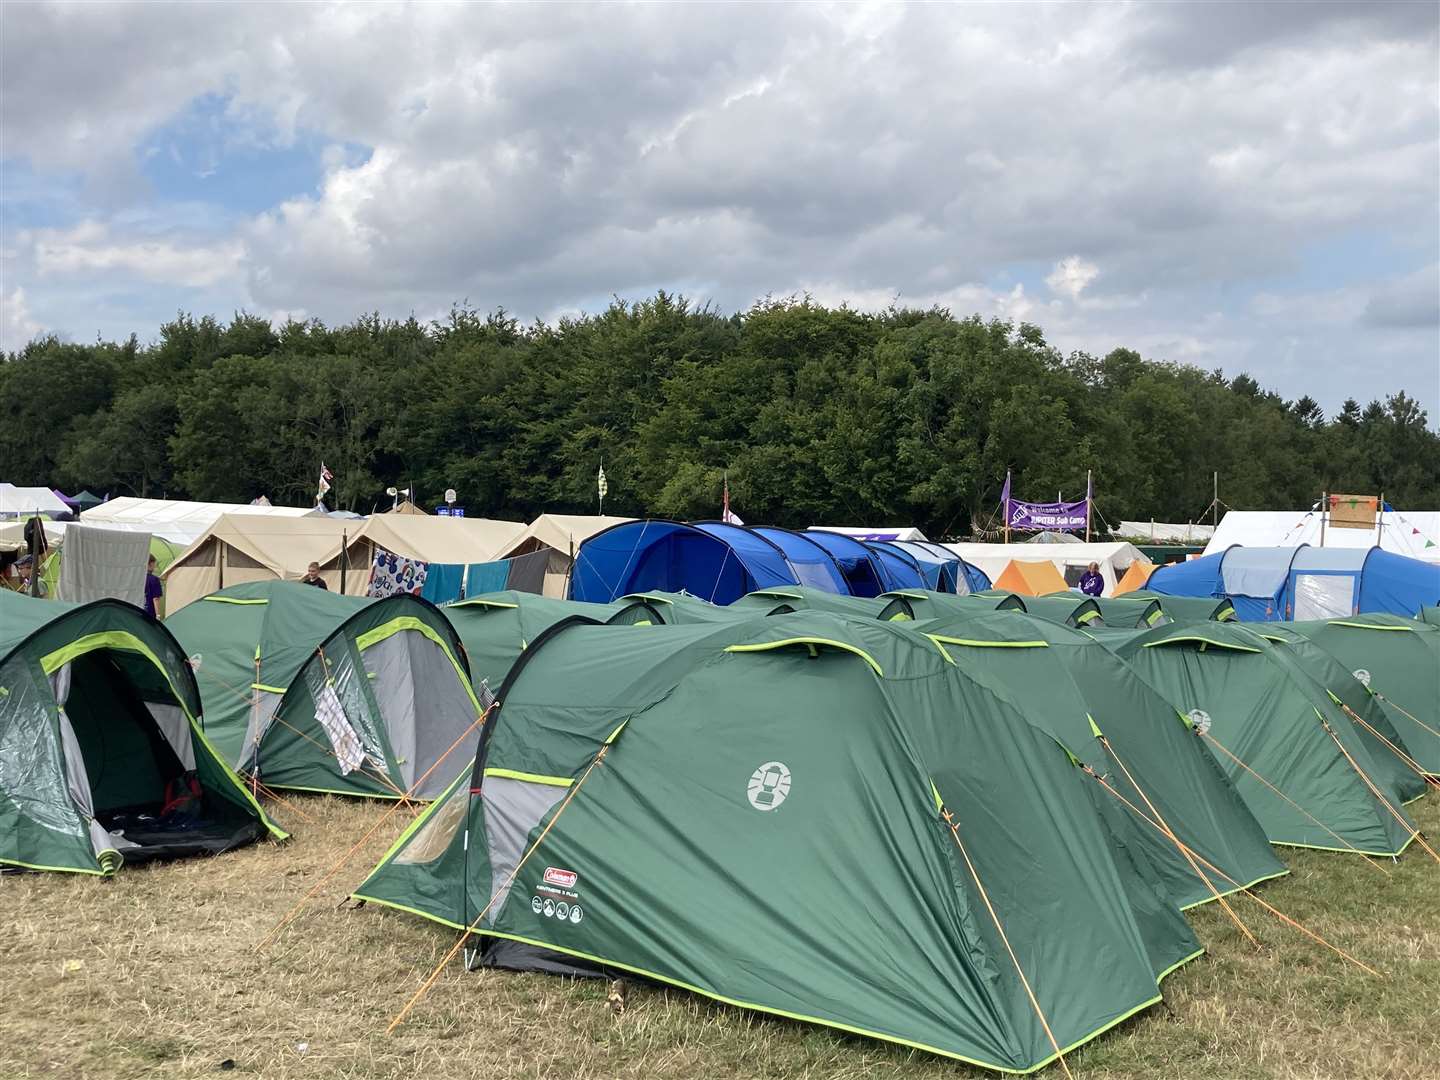 Tents everywhere at Detling showground for the Kent International Jamboree